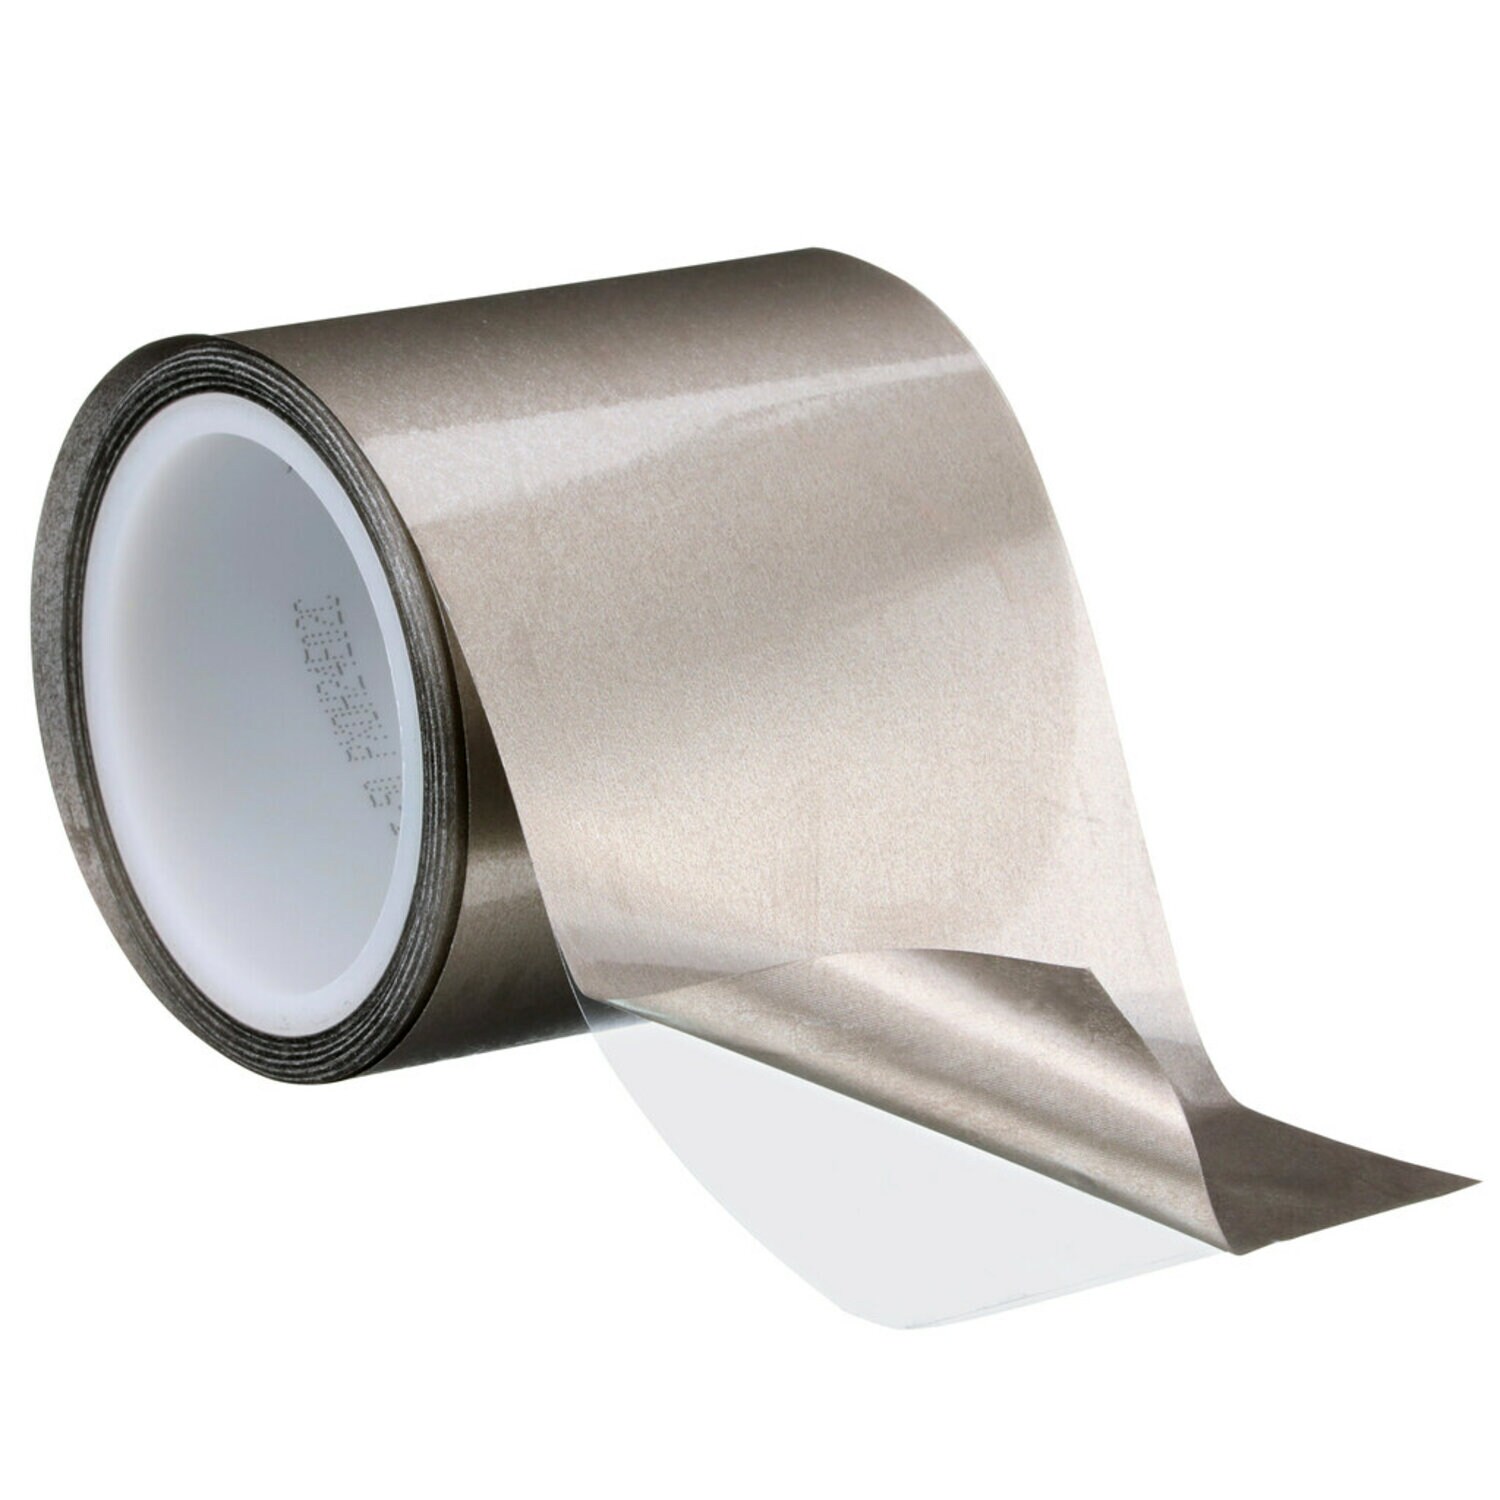 7100313595 - 3M Electrically Conductive Double-Sided Tape 5113DFT-50, Grey, 105 mm x 10 m, 8 Rolls/Case, Sample